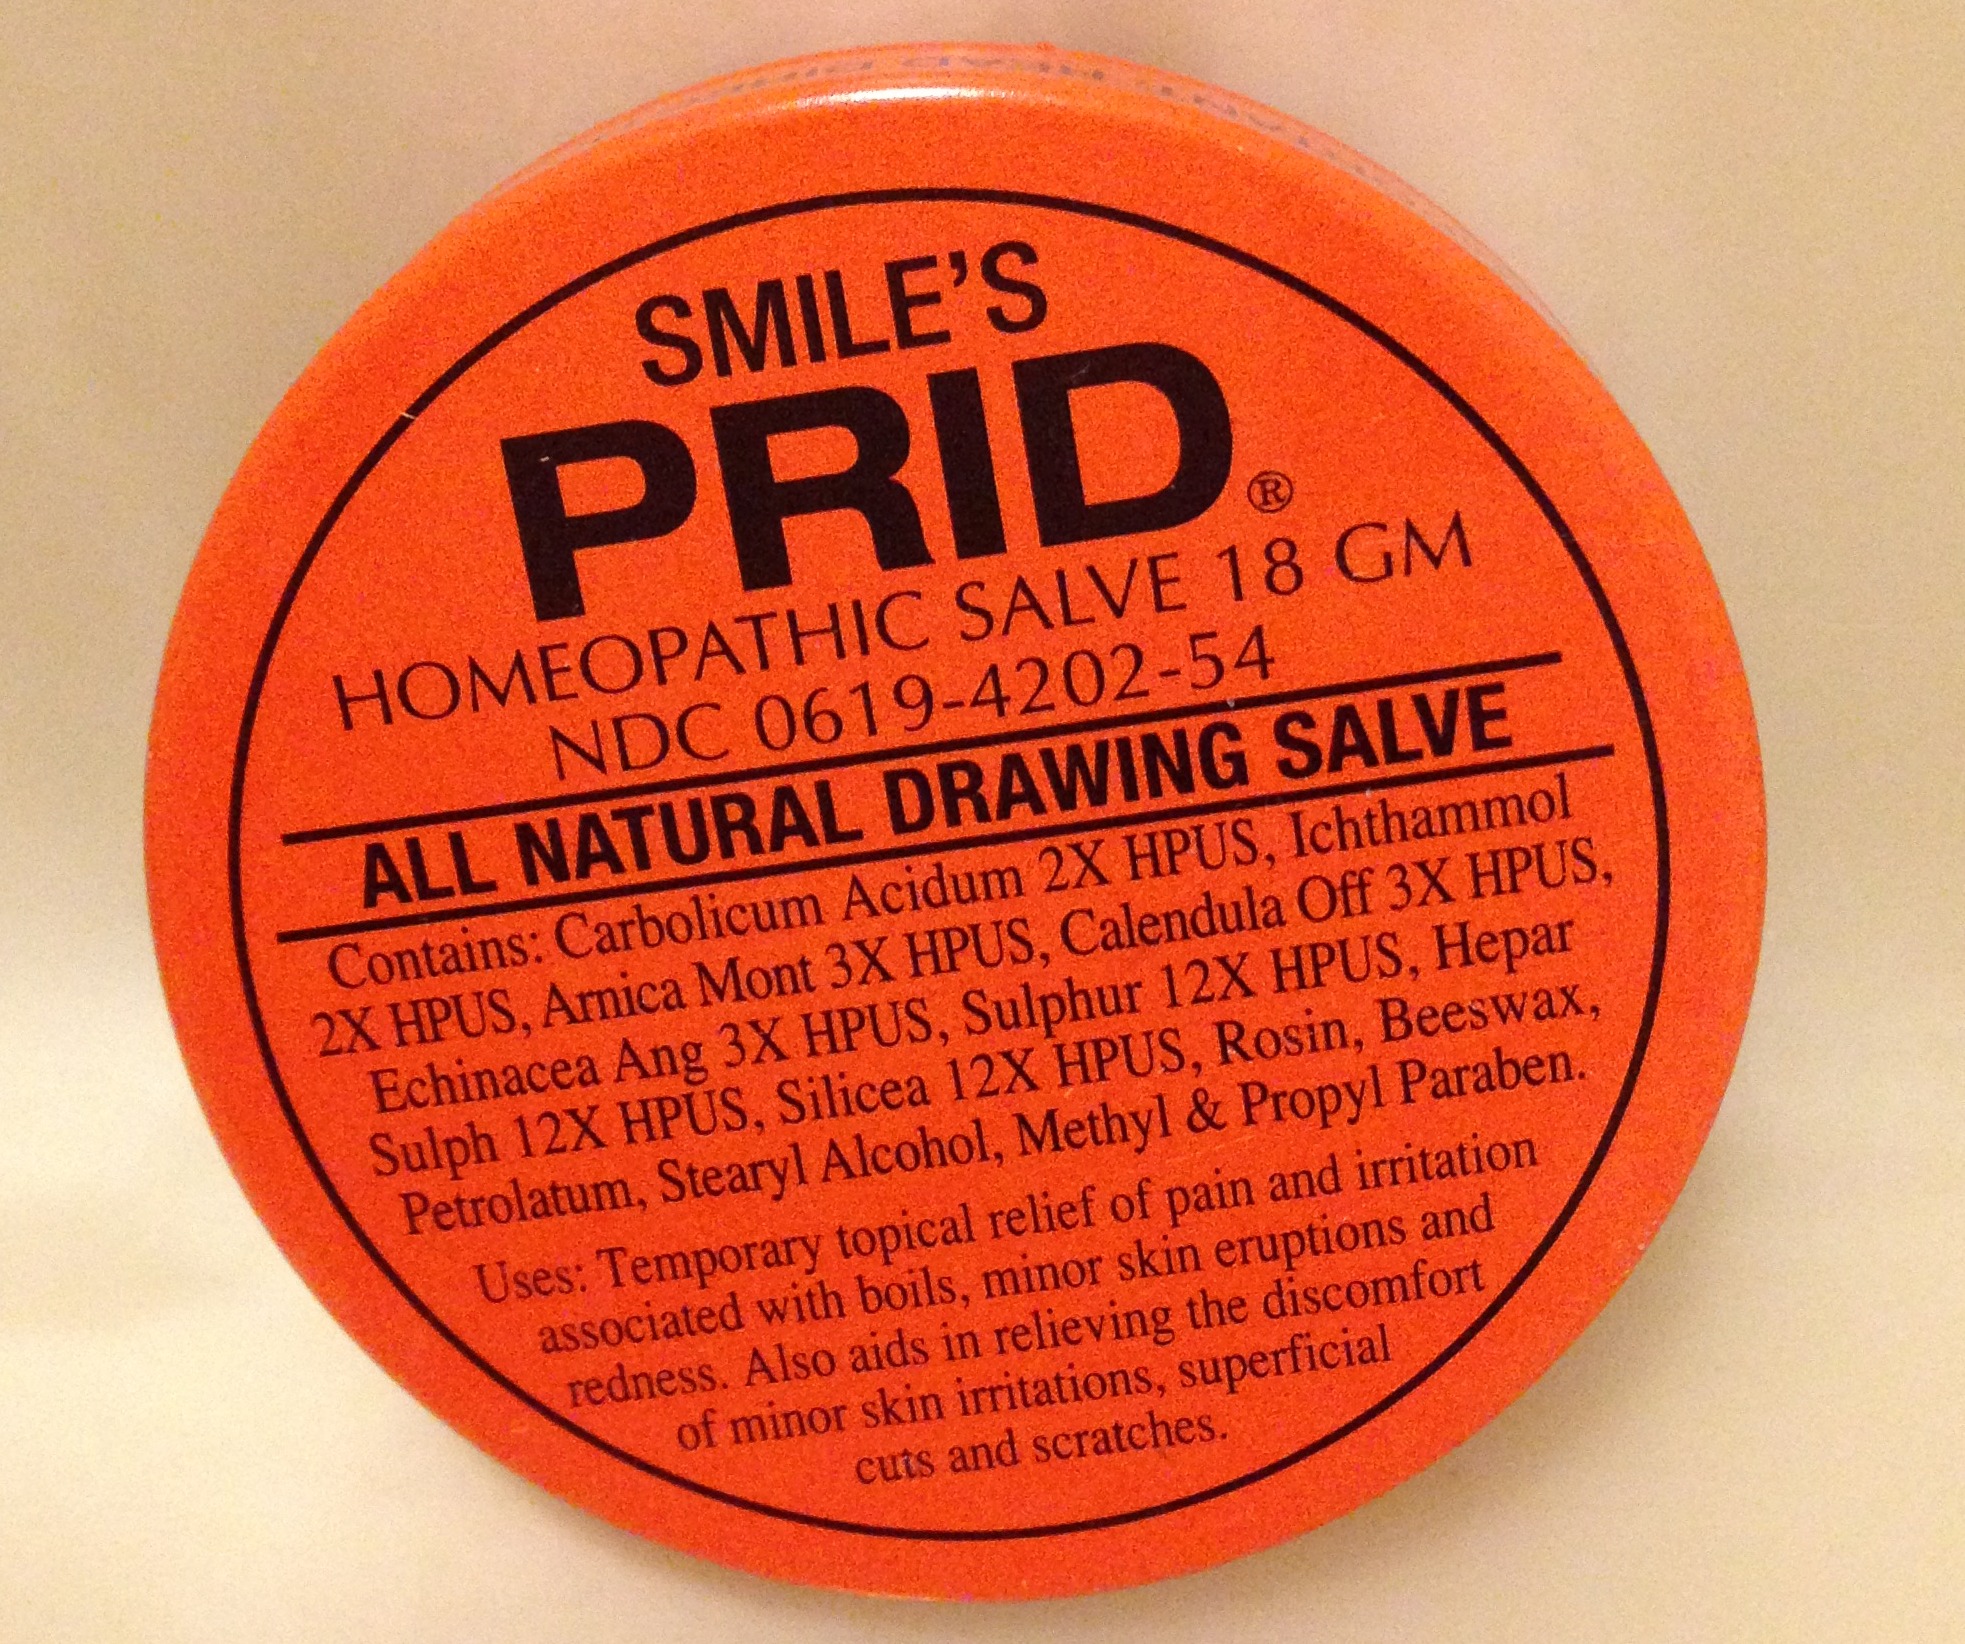 Homemade drawing salve recipe to draw out splinters, boils, and